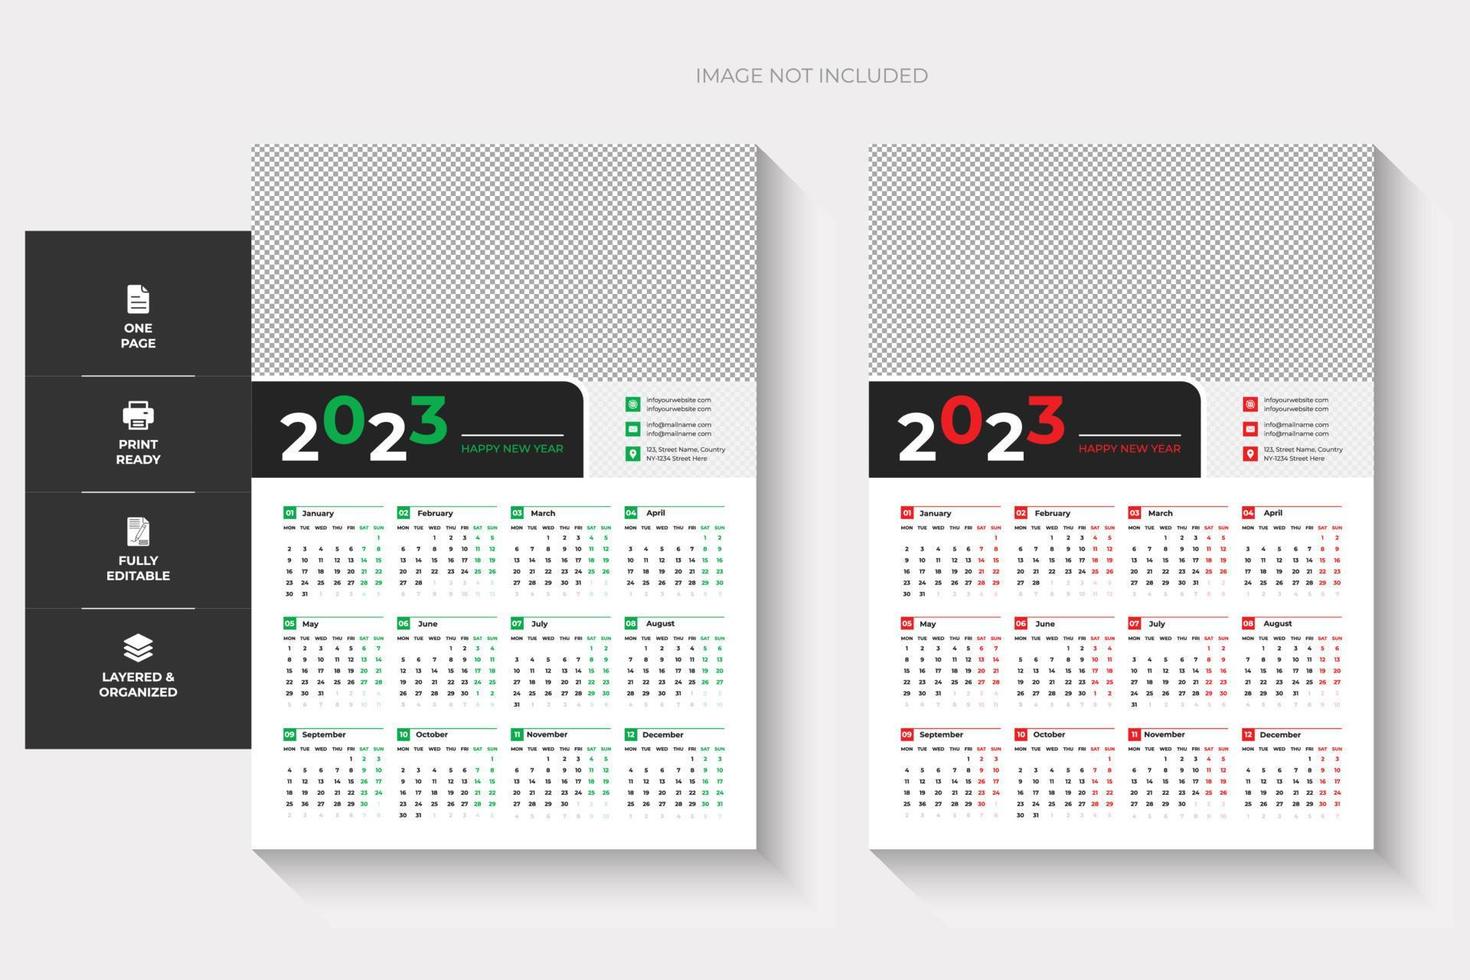 2023 one page wall calender, two colourfull and, creative design vector